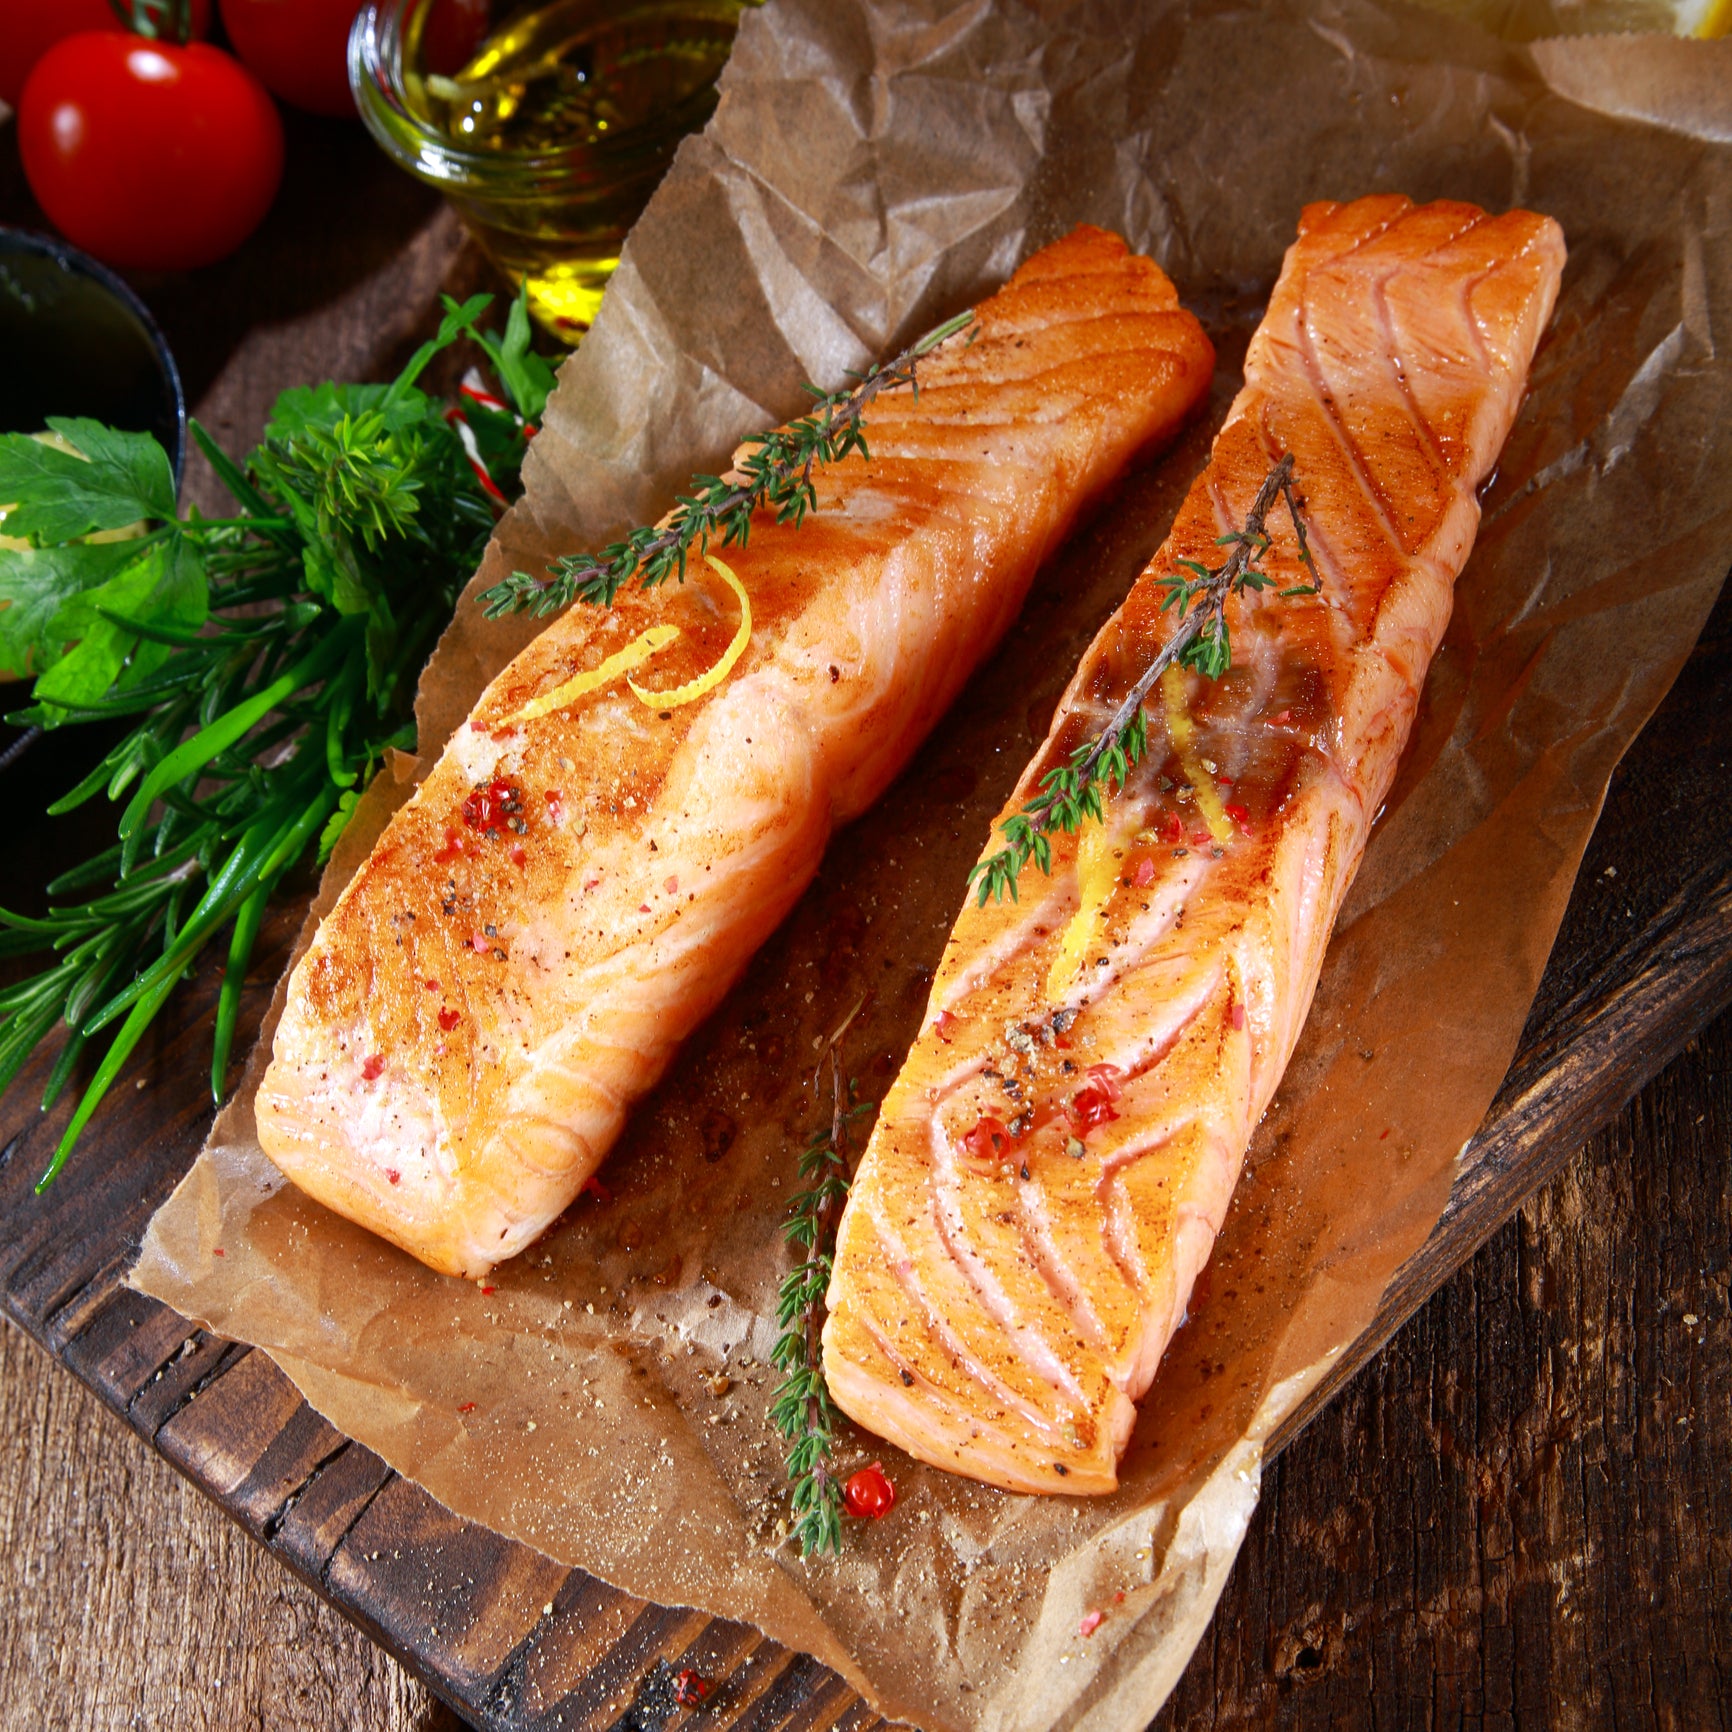 5 Surprising Facts About Salmon You Didn't Know